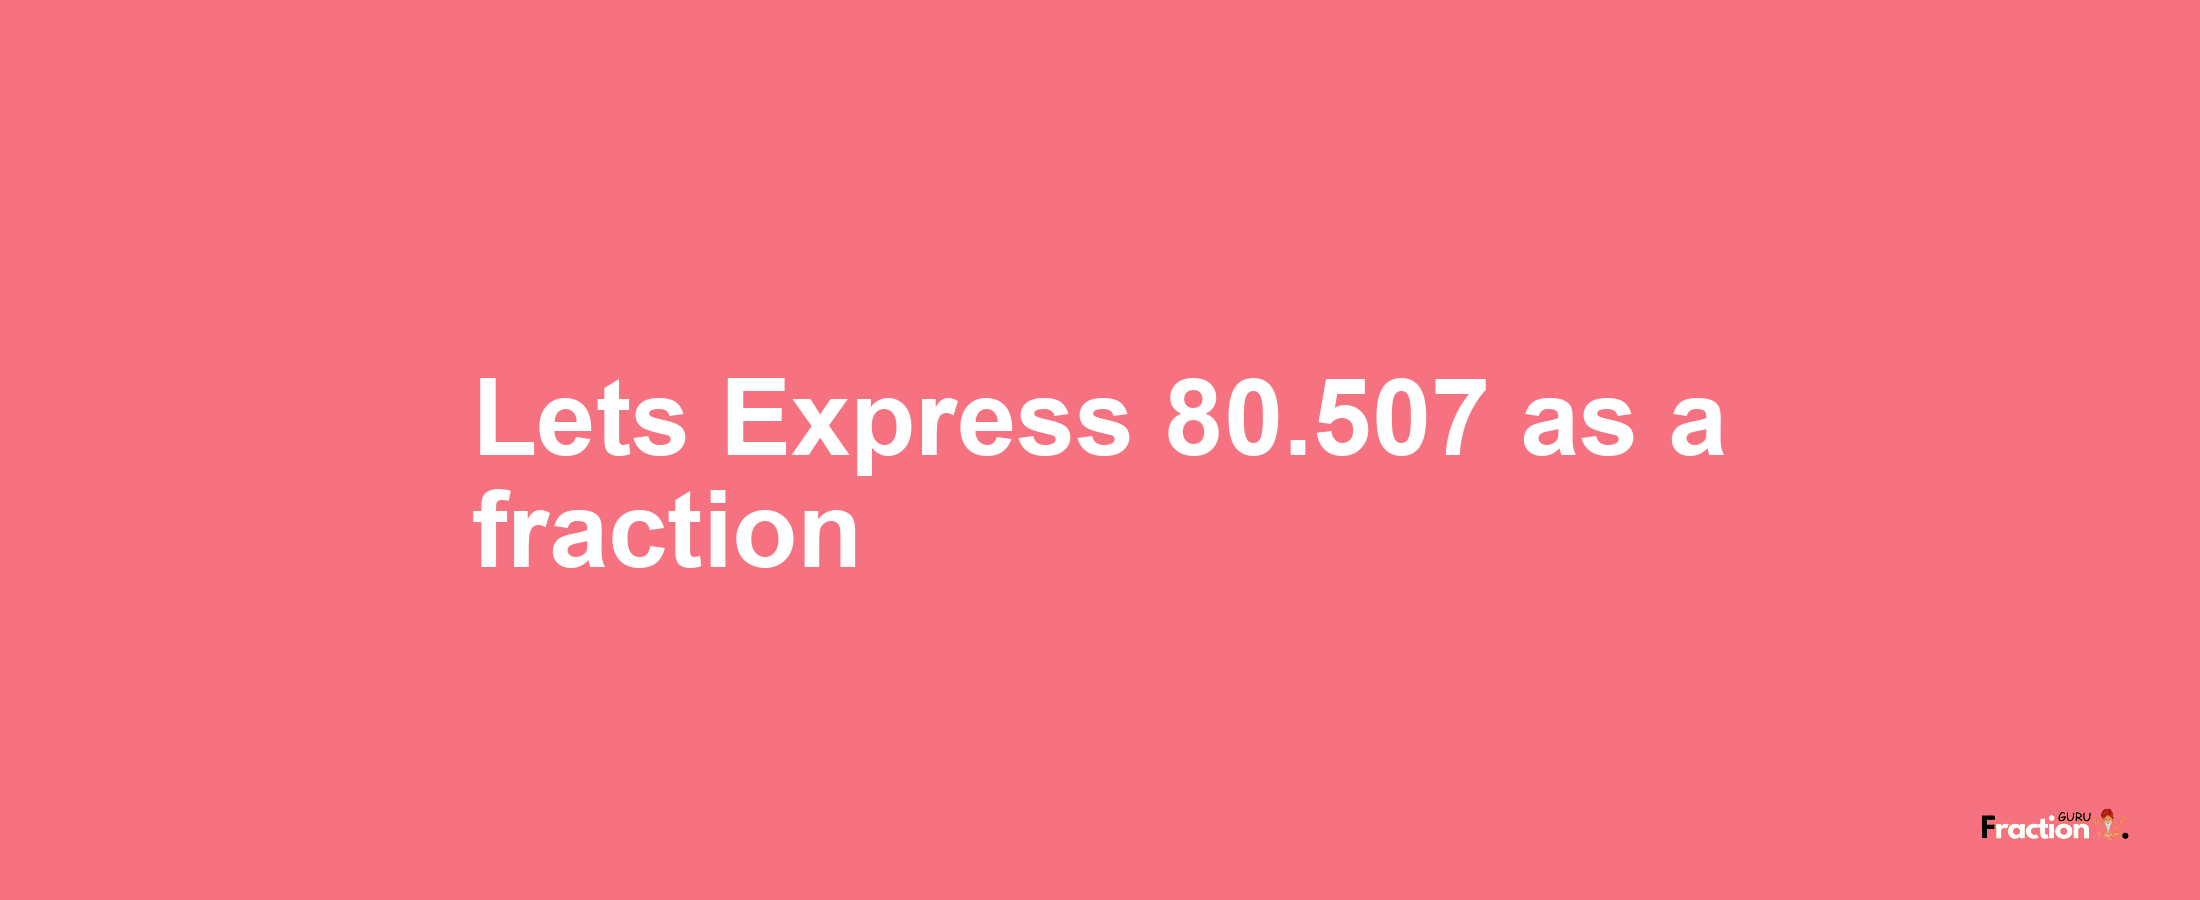 Lets Express 80.507 as afraction